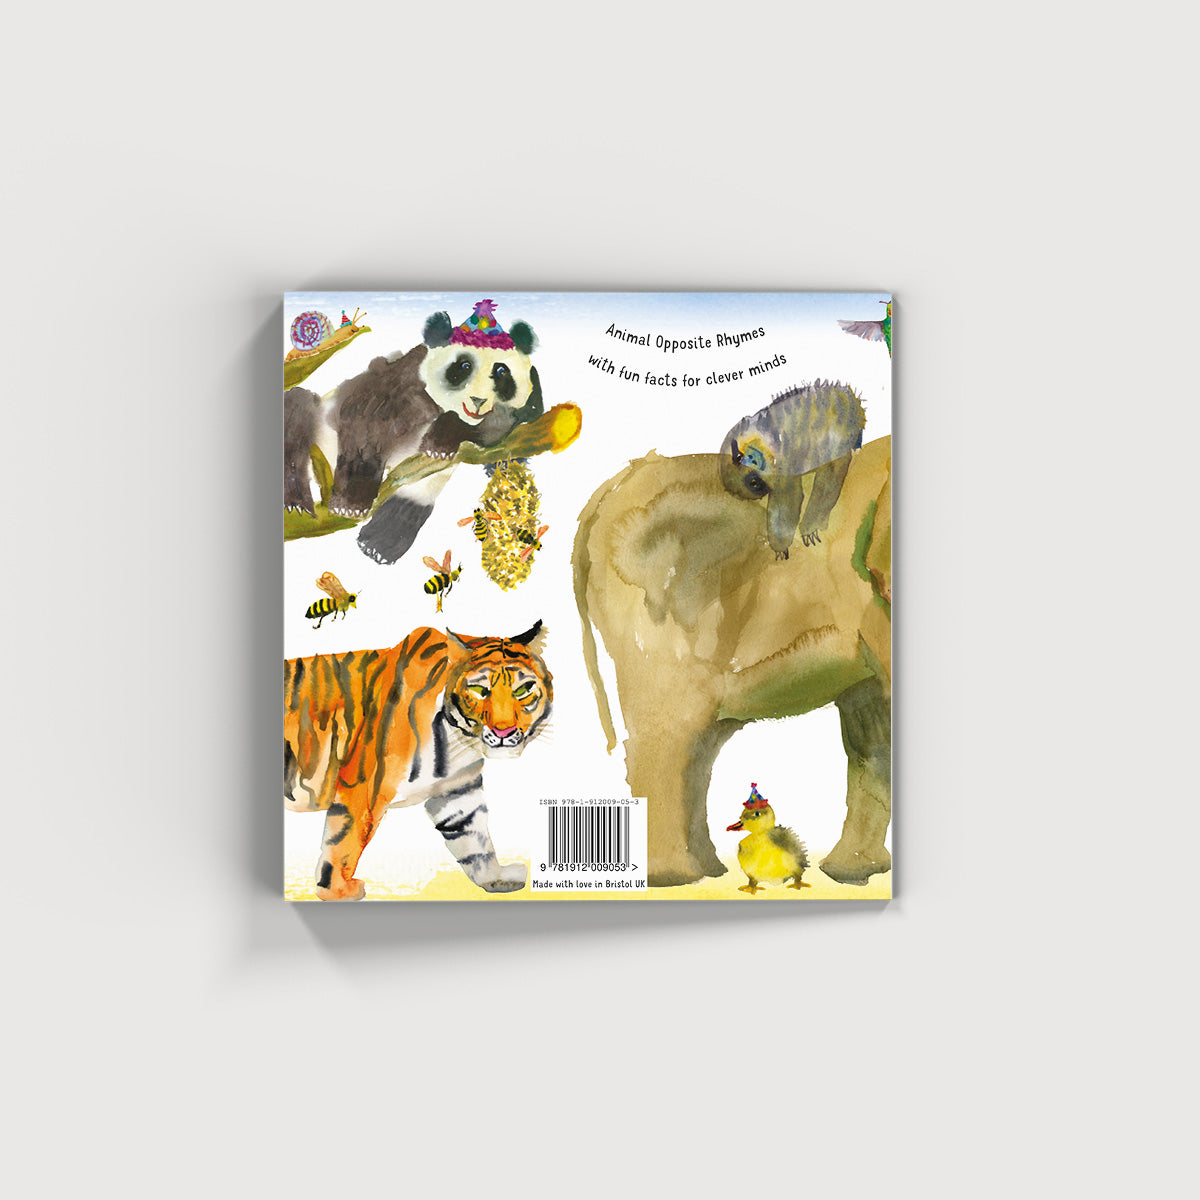 animal opposite rhymes with fun facts for clever minds'' book with watercolour safari animals on the cover